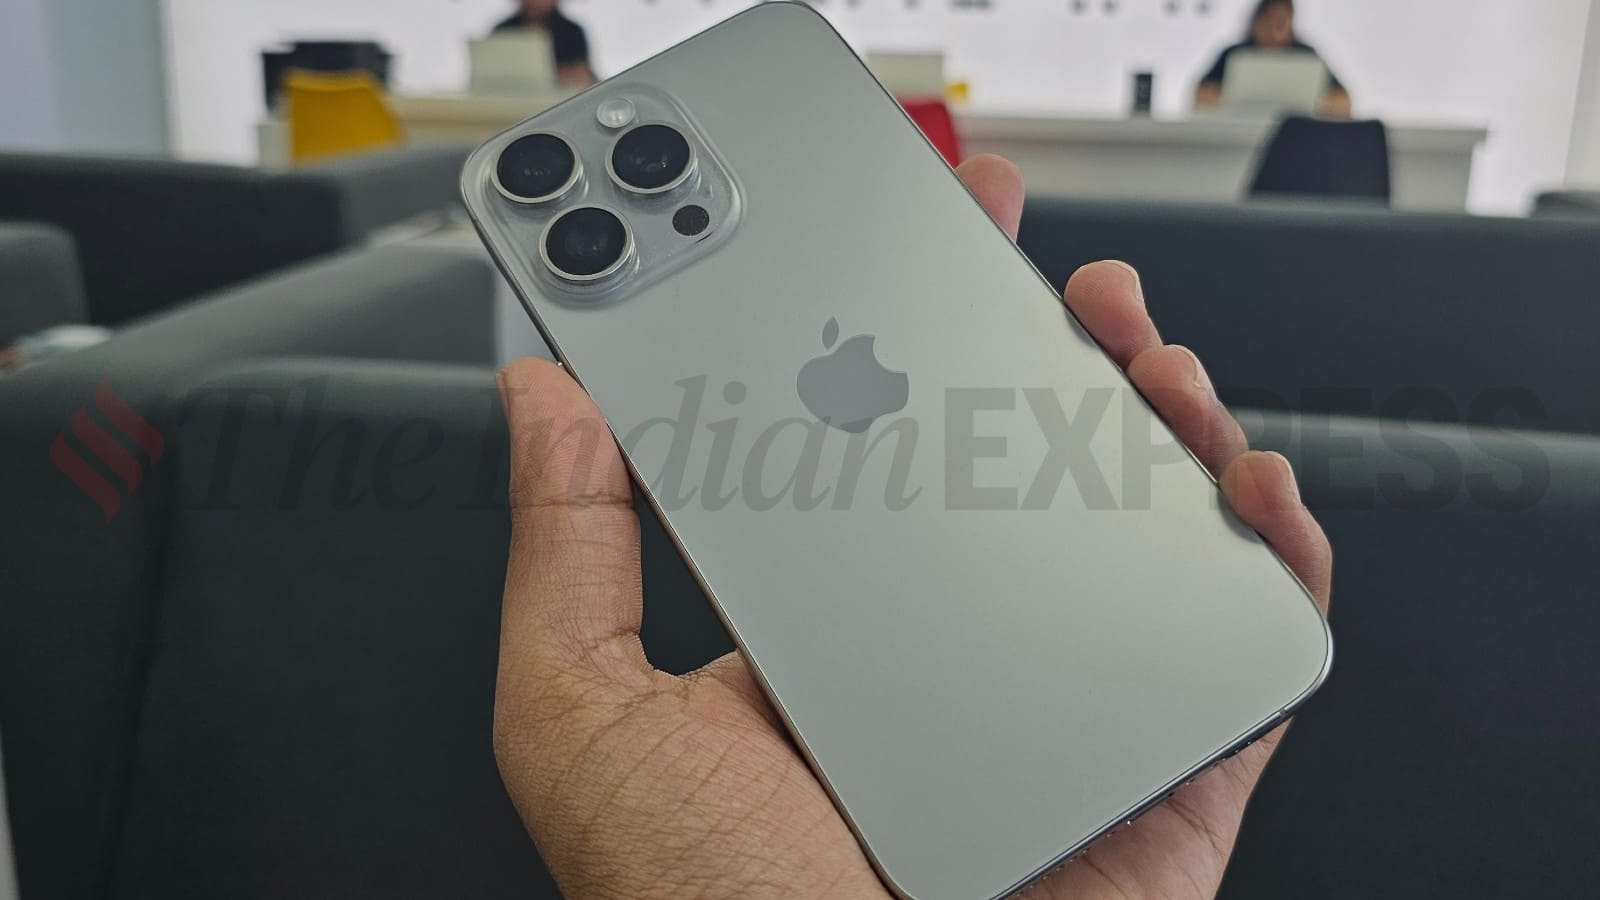 android, apple iphone 15 pro max chosen as the best-selling smartphone of q1 2024